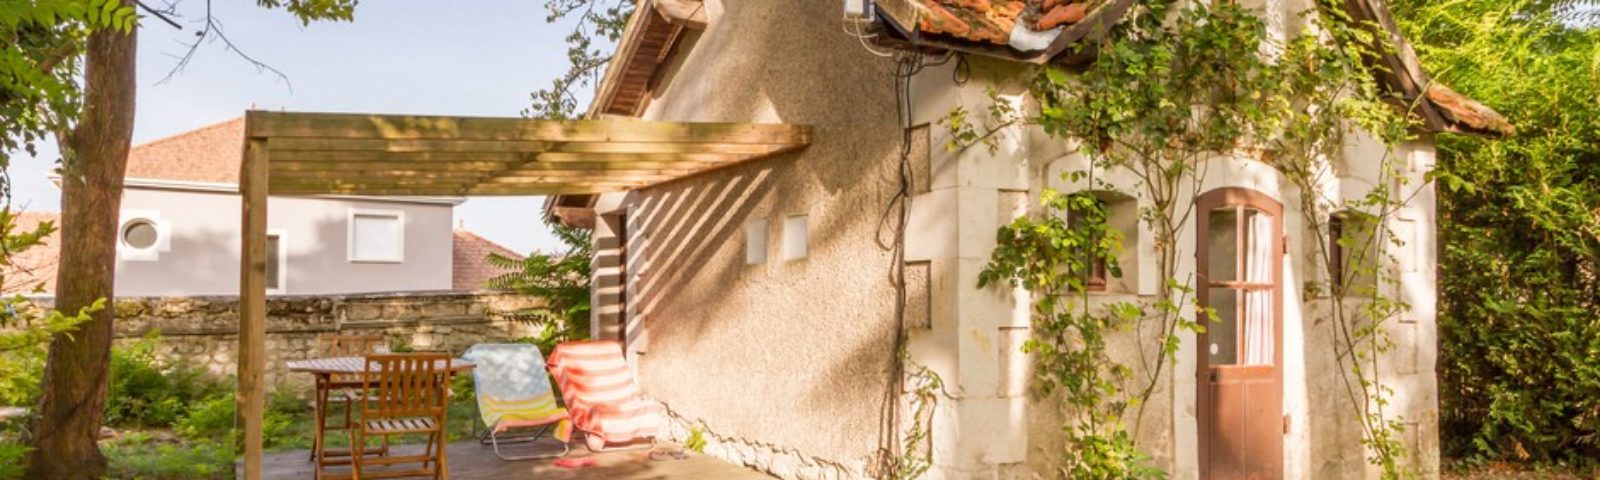 Atypical stone house - camping holidays, France, Poitou-Charentes